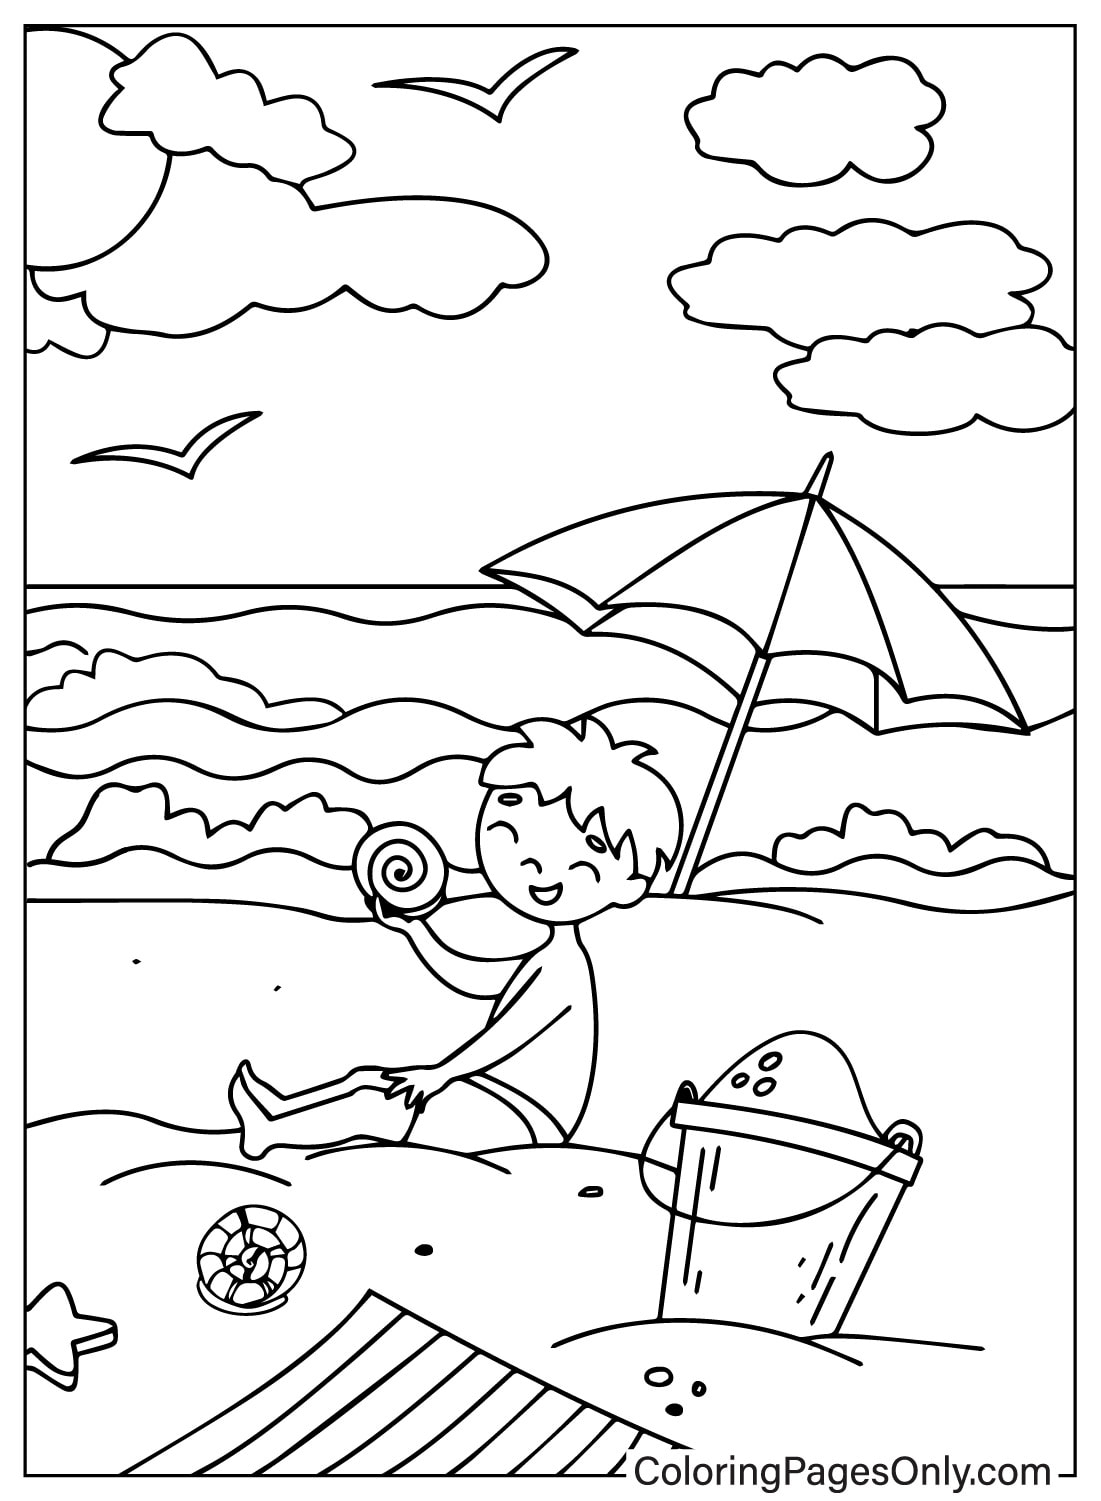 Boy Playing Cheerfully on the Beach from Beach